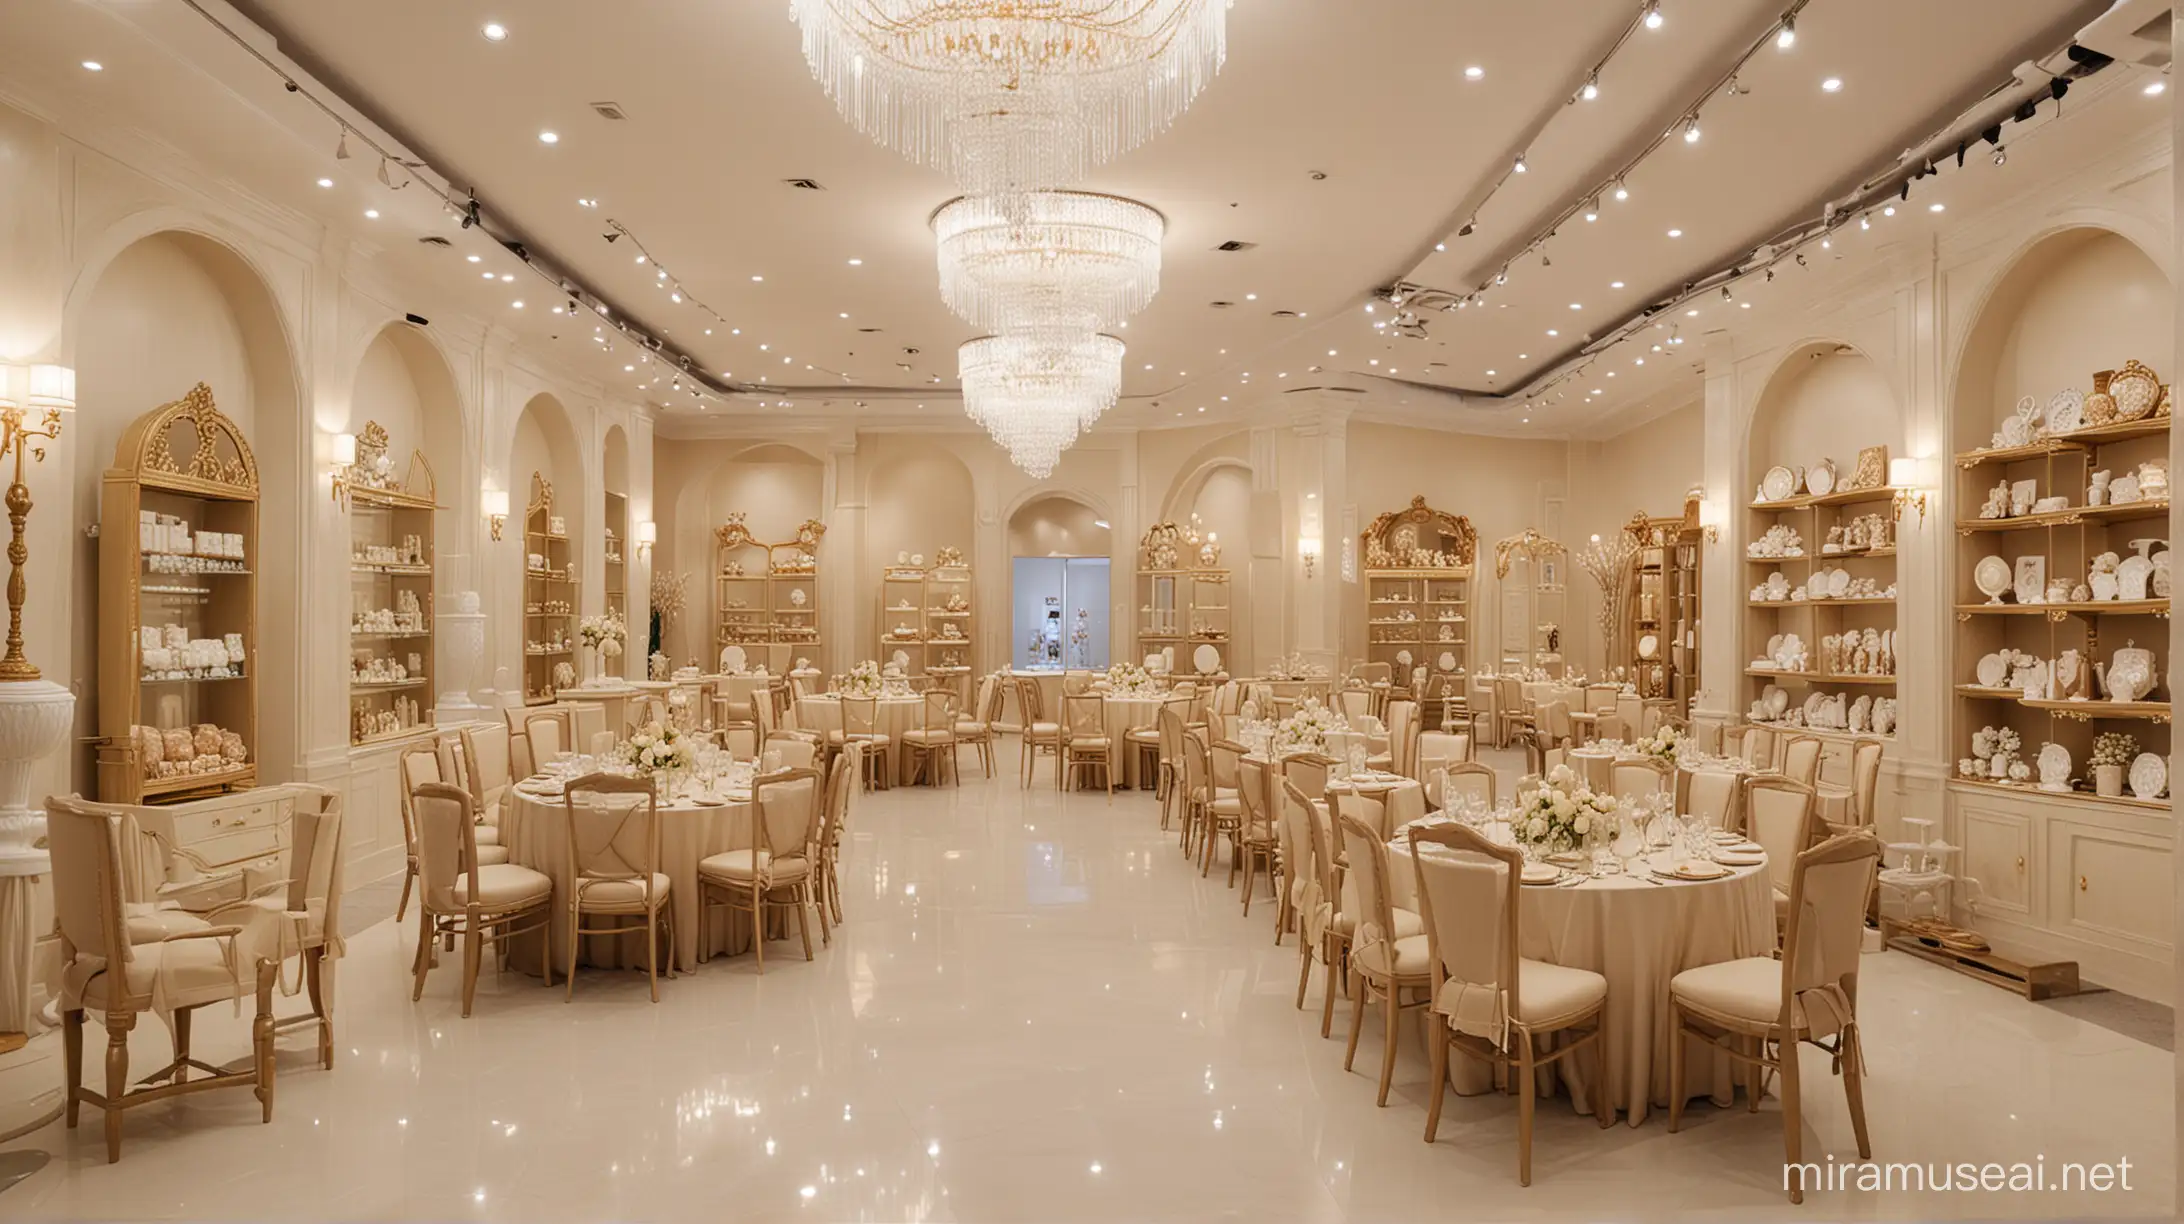 Wedding showroom; display cases; beige color palette; lighting fixtures; big round table; wedding favors; chairs; peranakan theme